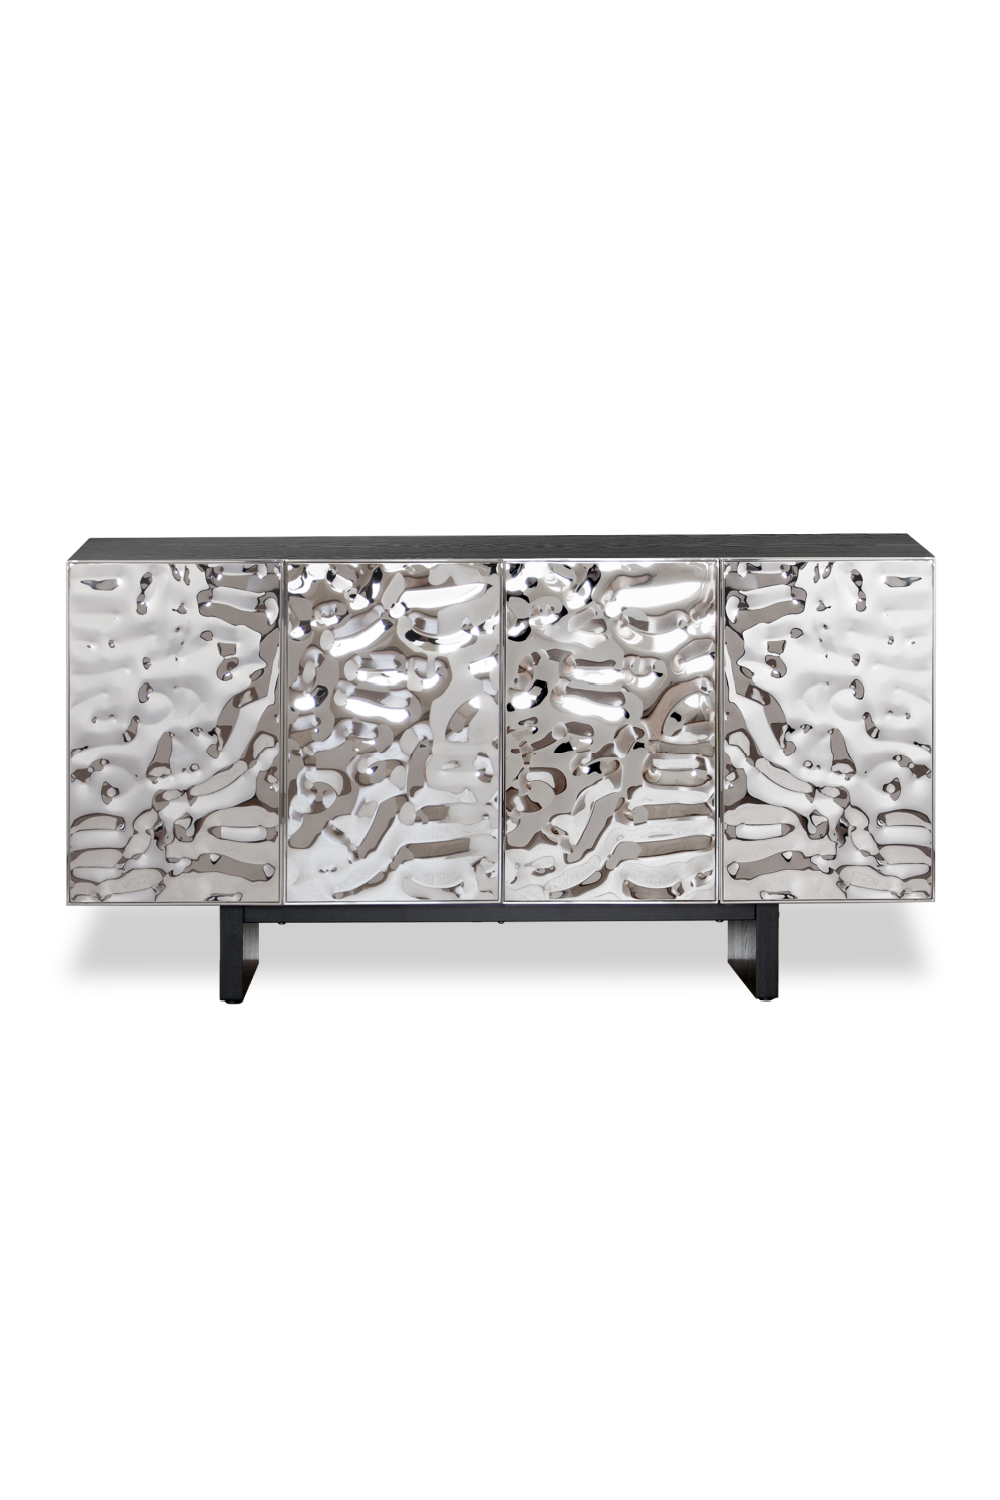 Hammered Stainless Steel Sideboard | Liang & Eimil Baltimore | Oroa.com